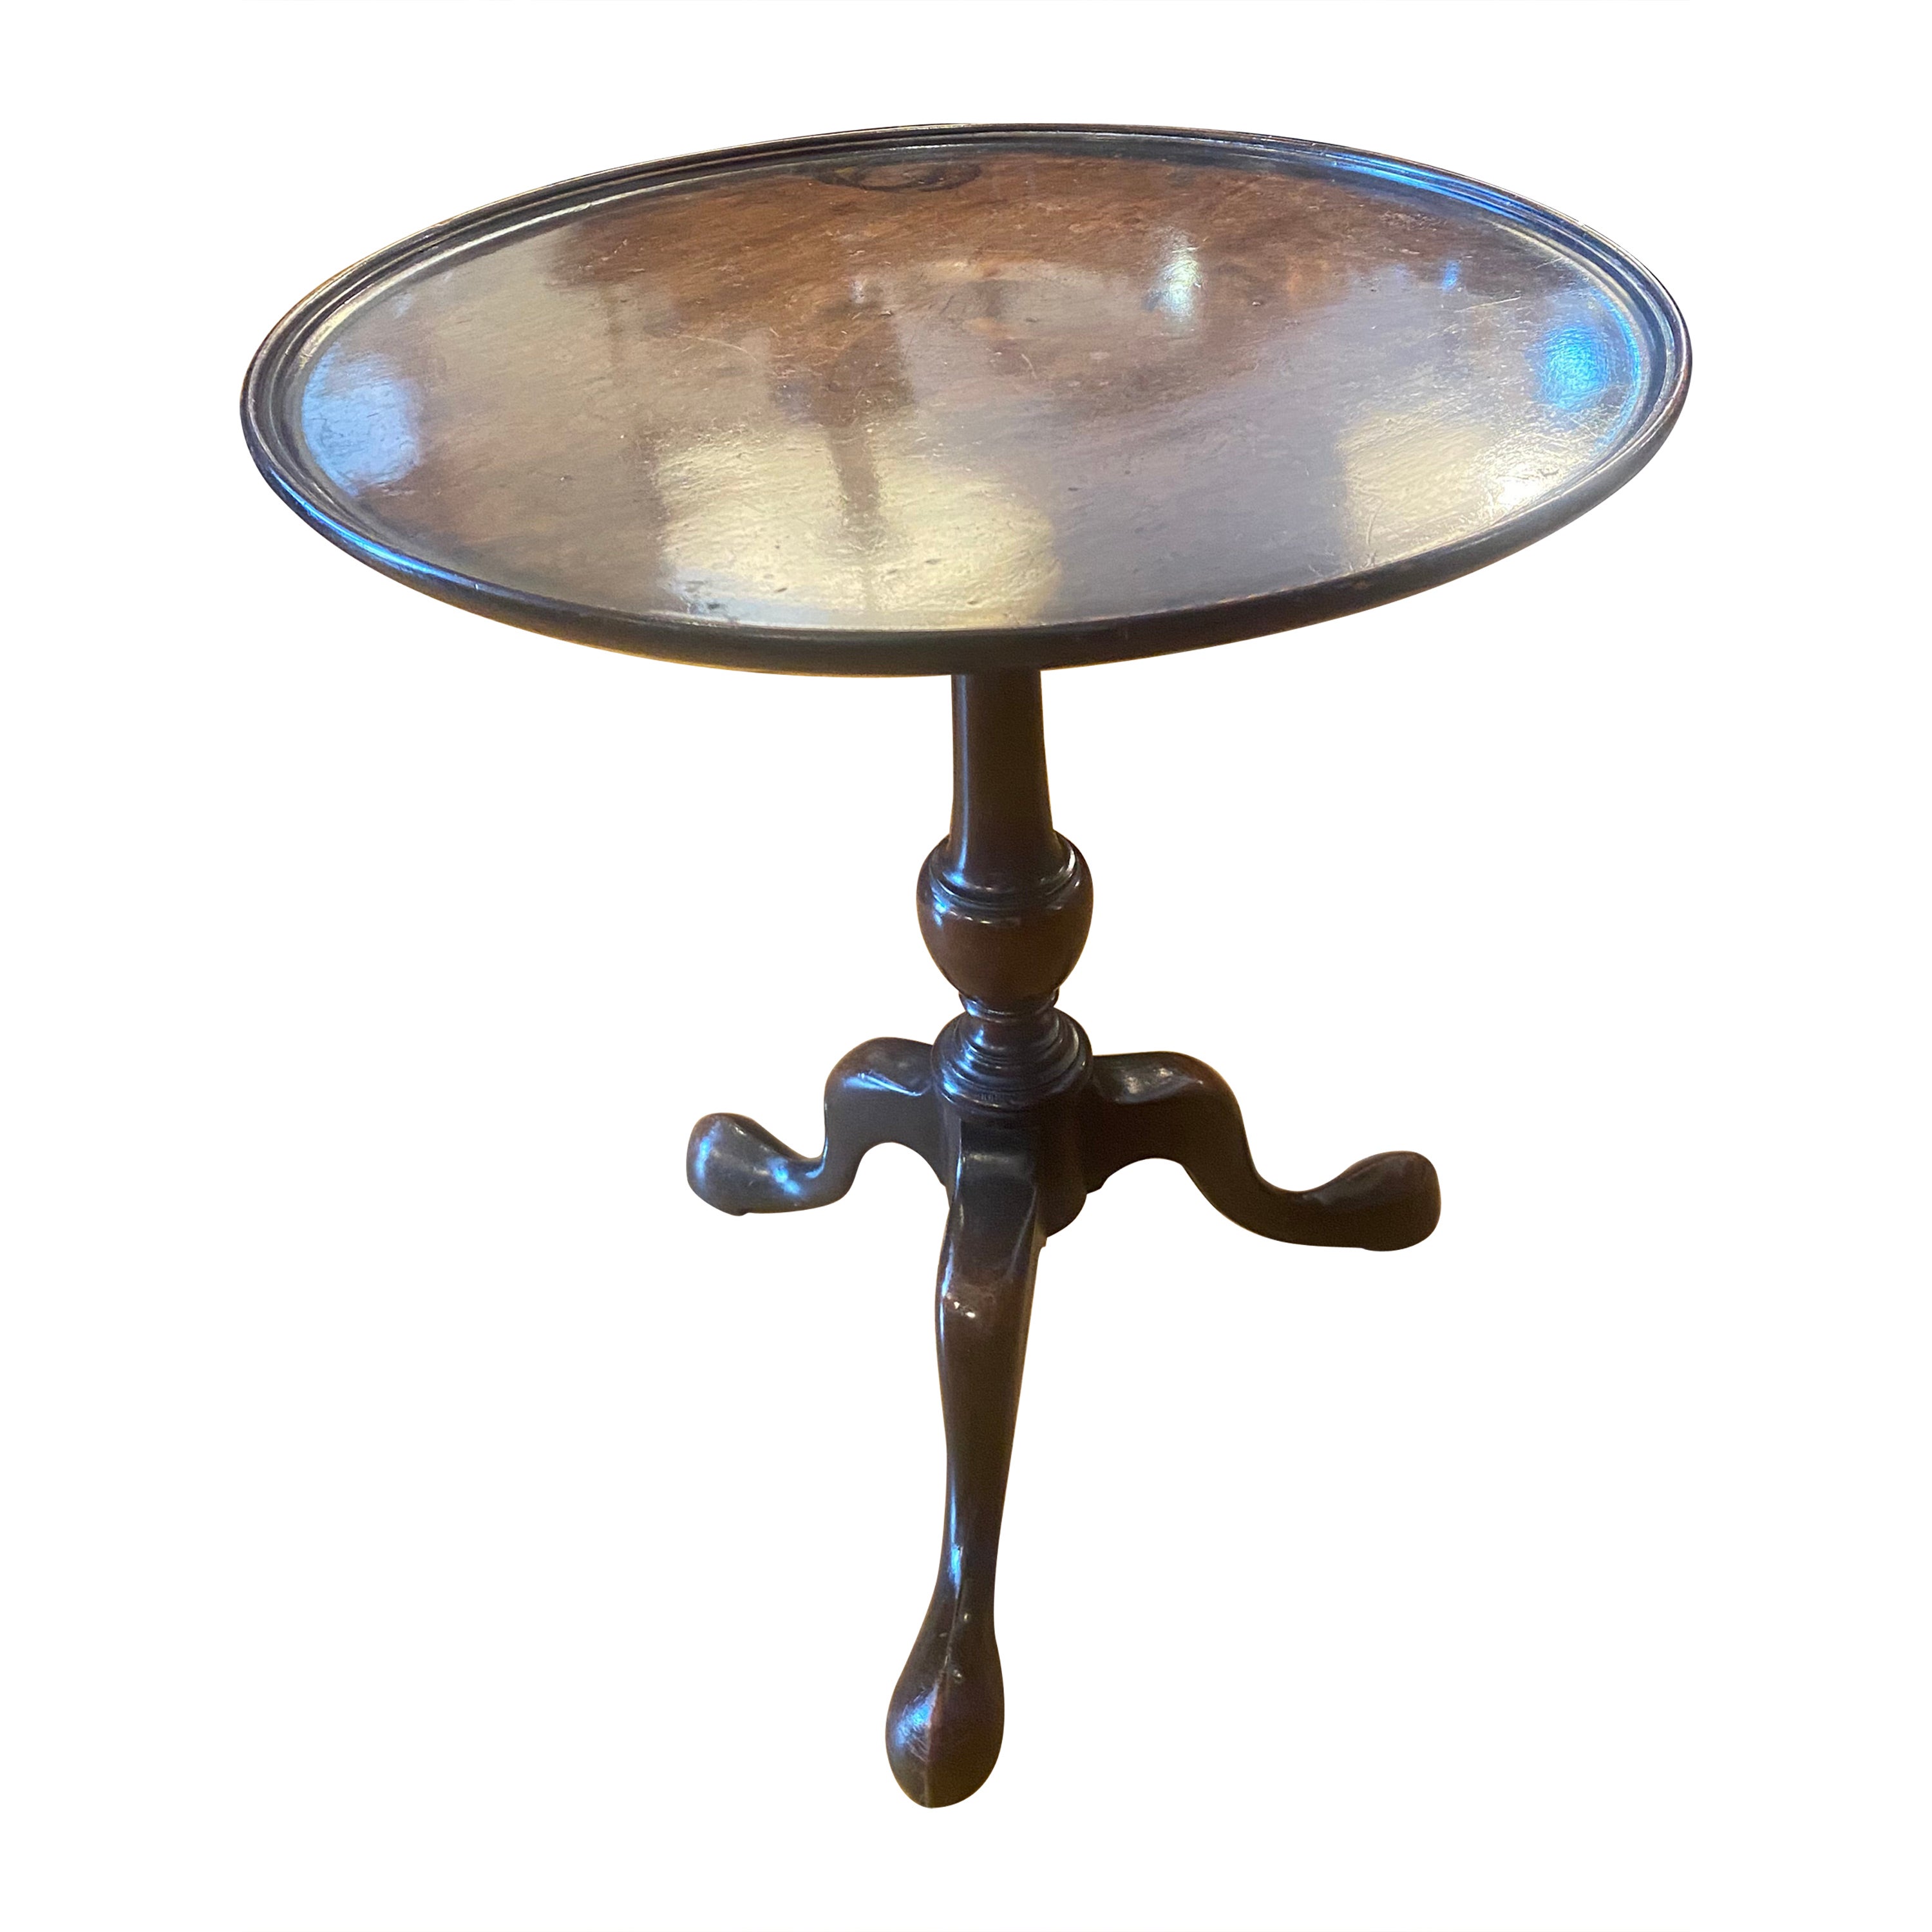 A George III mahogany side table with well patinated, dished, circular top. For Sale